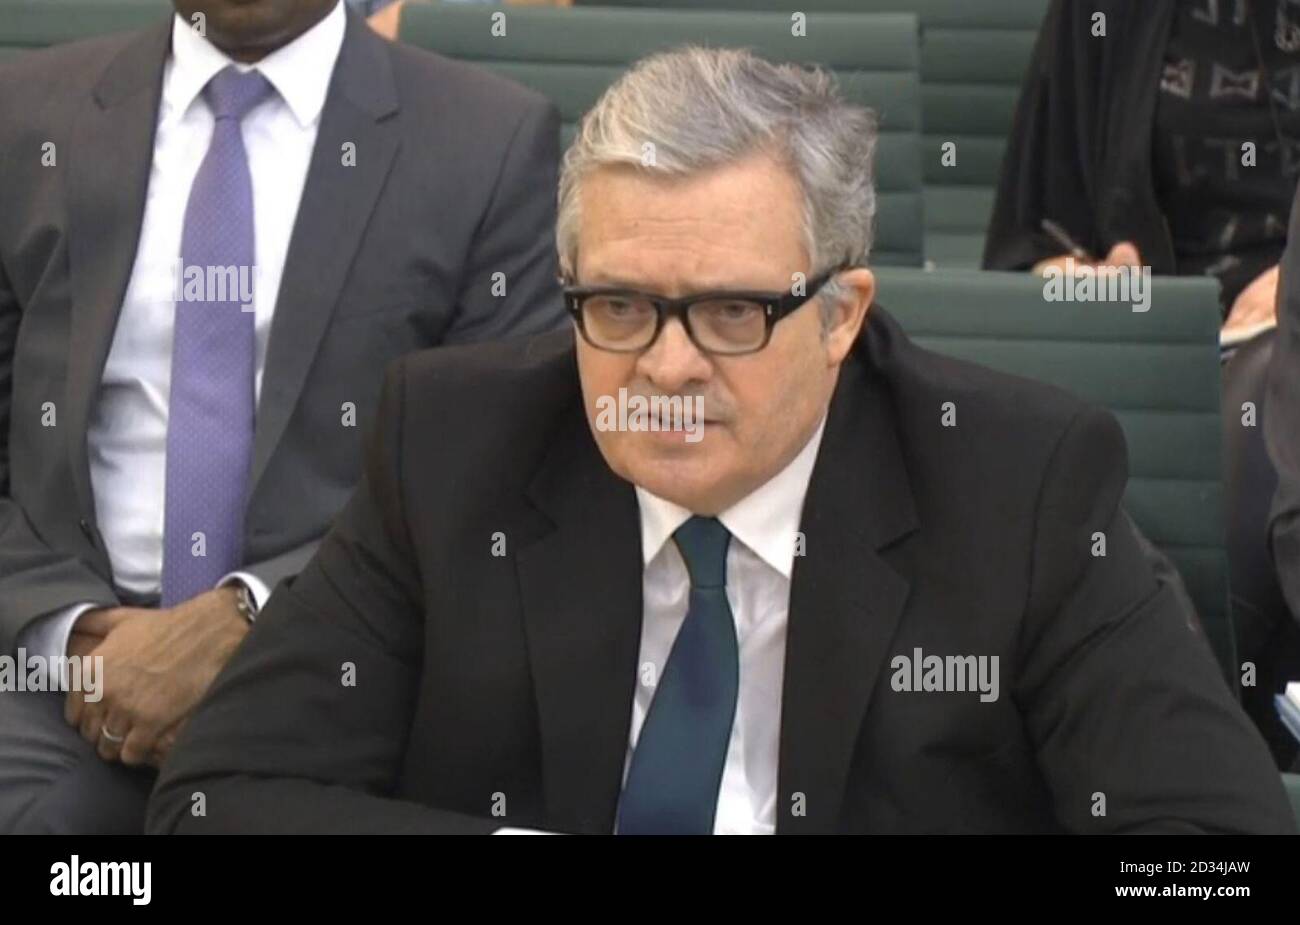 Paul Willis, the managing director of Volkswagen Group UK answering questions in front of transport Select Committee on the VW diesel emissions scandal. Stock Photo